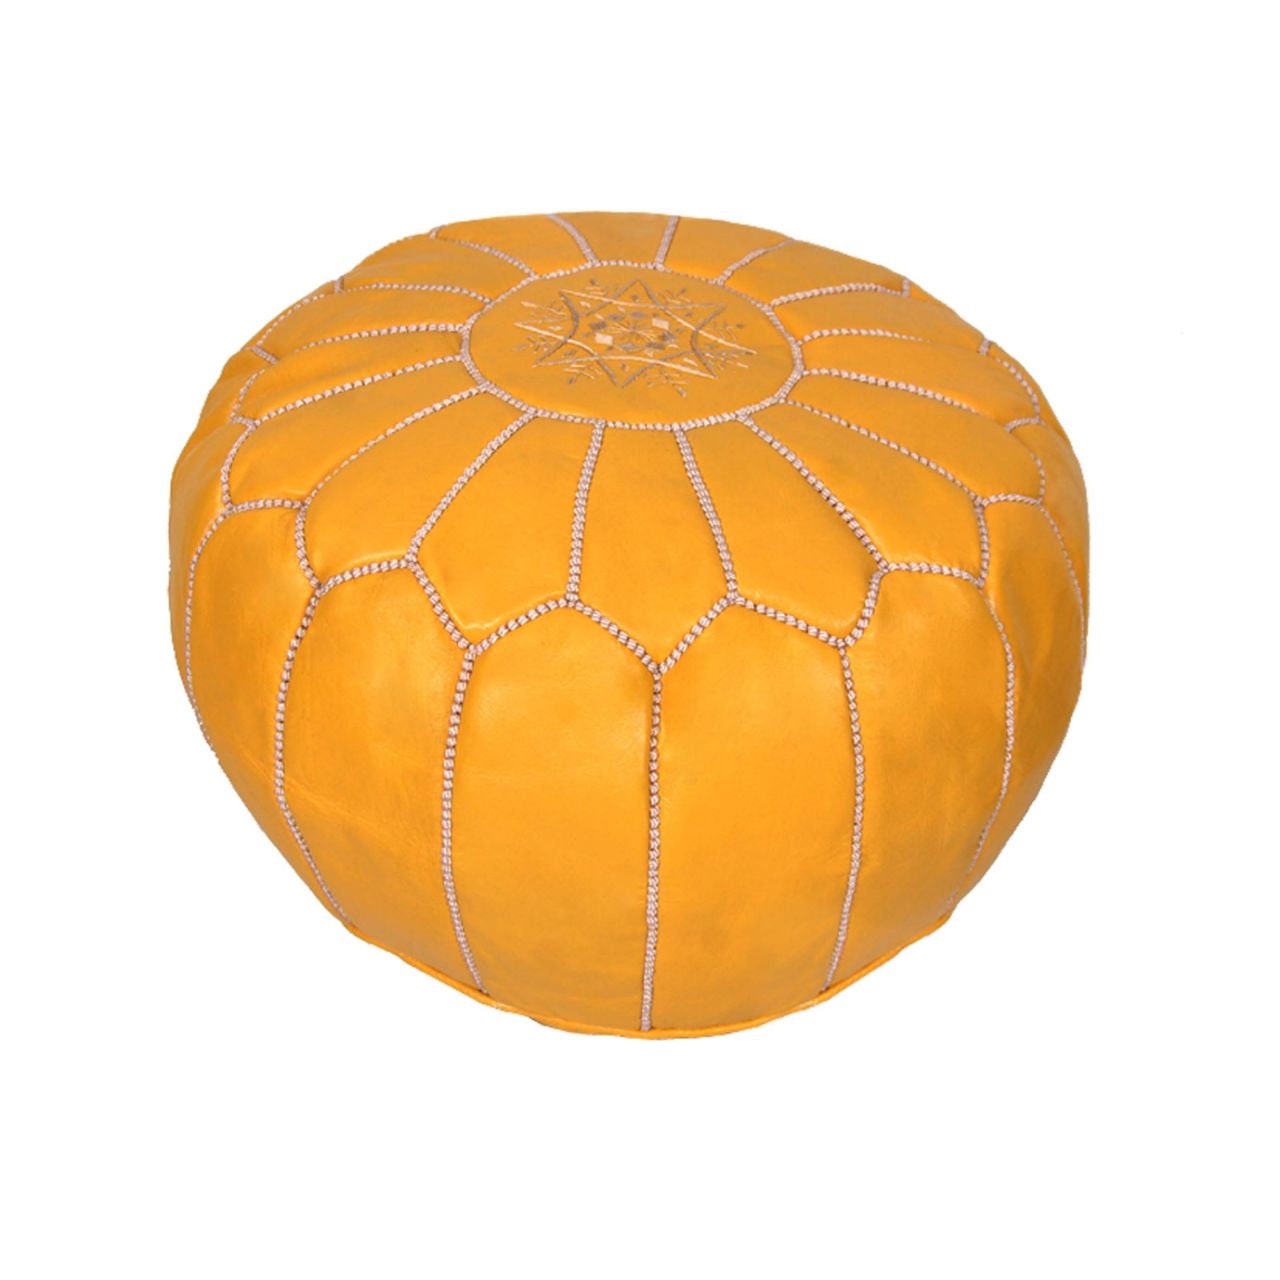 Moroccan Pouf Leather Cover Etsy Handmade Yellow Leather Etsy